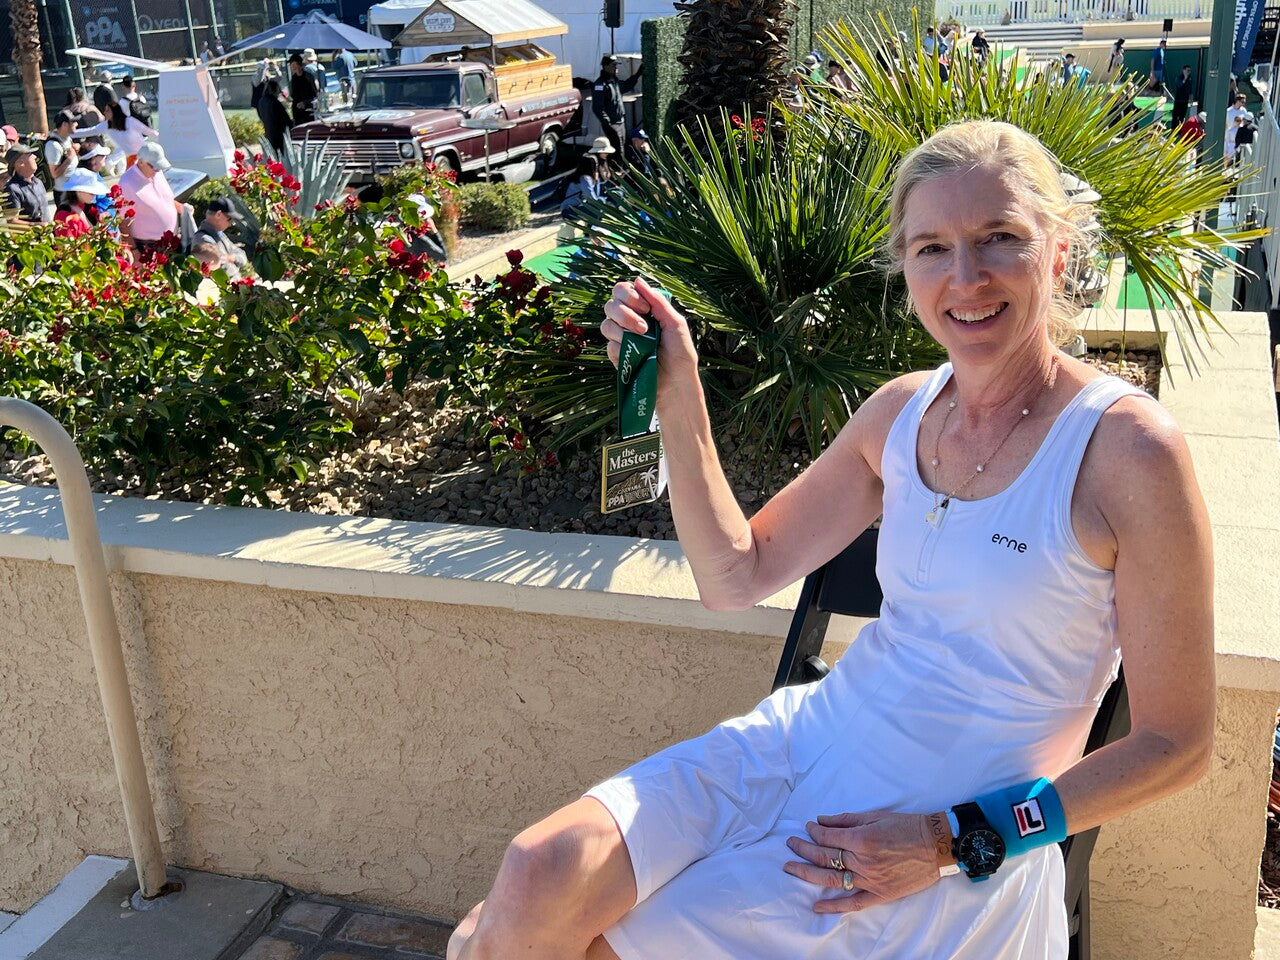 Lynn Beck relaxes near a pickleball court. She holds up her PPA Masters medal as she smiles at the camera.